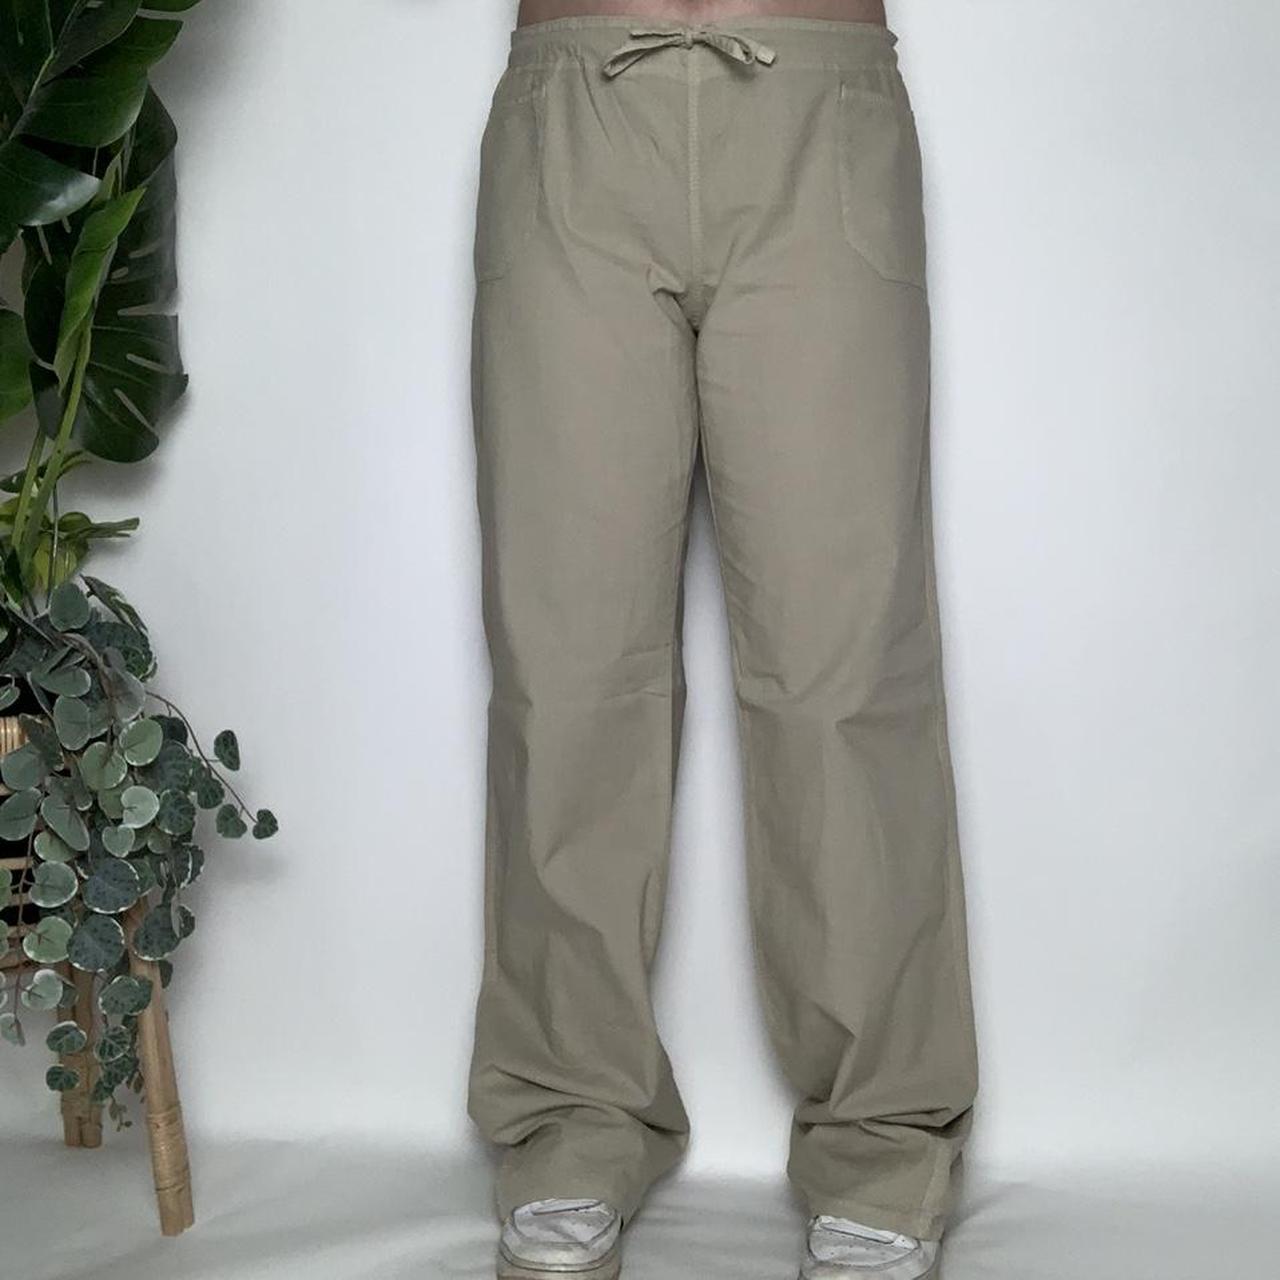 Y2K COOL GIRL 🧞‍♀️ vintage 90s tan cargo trousers